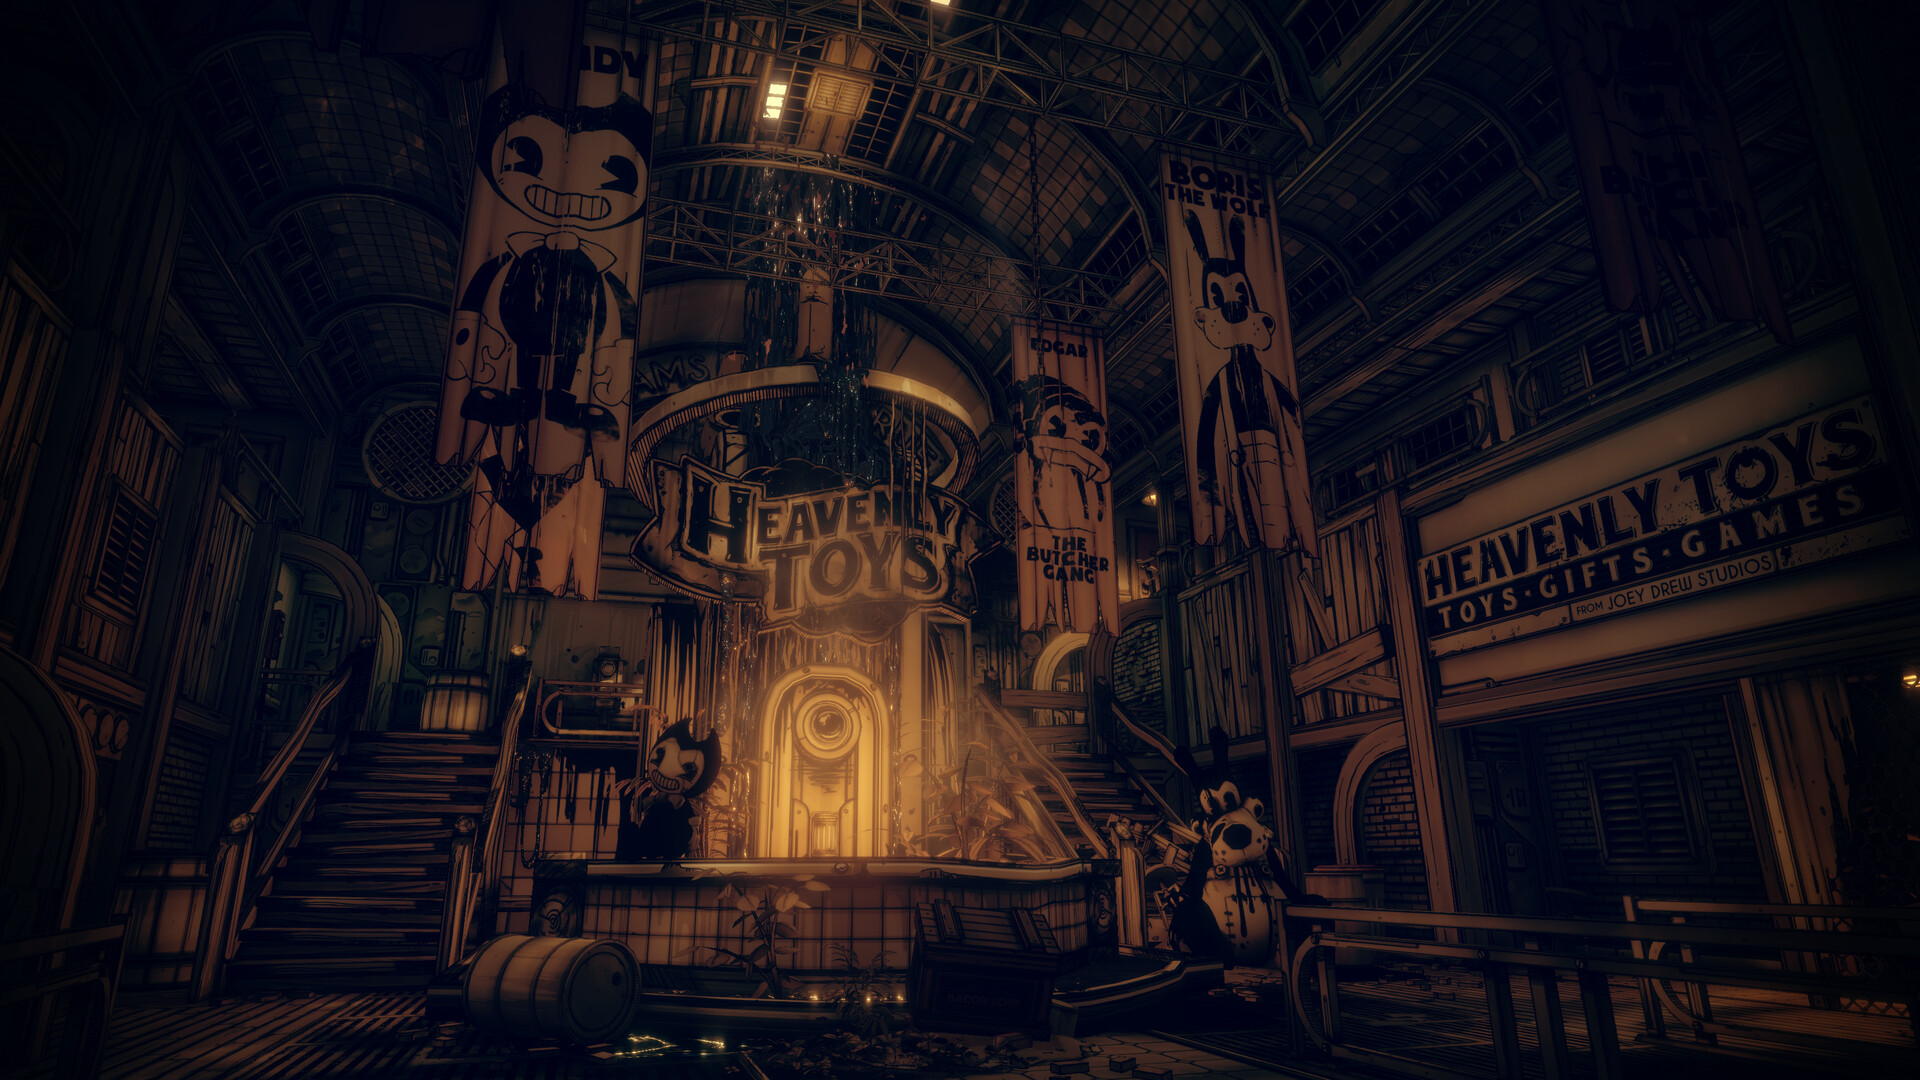 Bendy and the Ink Machine - Metacritic